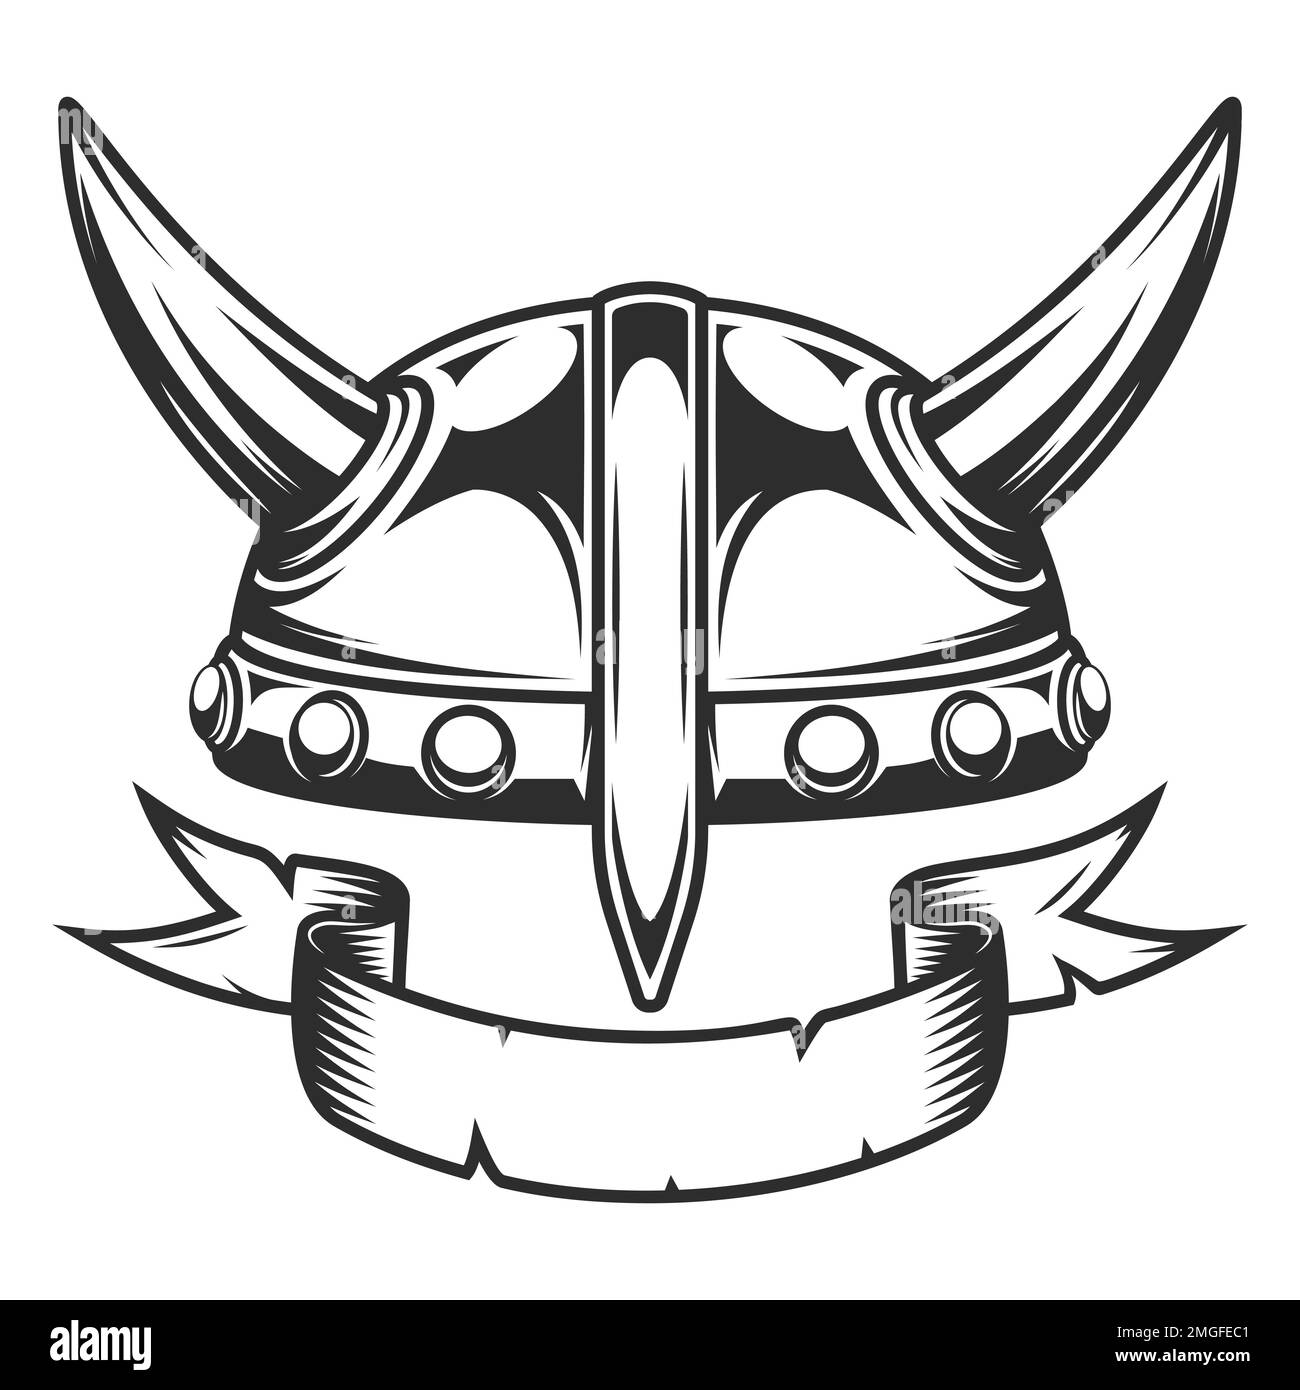 Viking vintage emblem with serious medieval nordic warrior horned helmet and ribbon isolated illustration Stock Photo